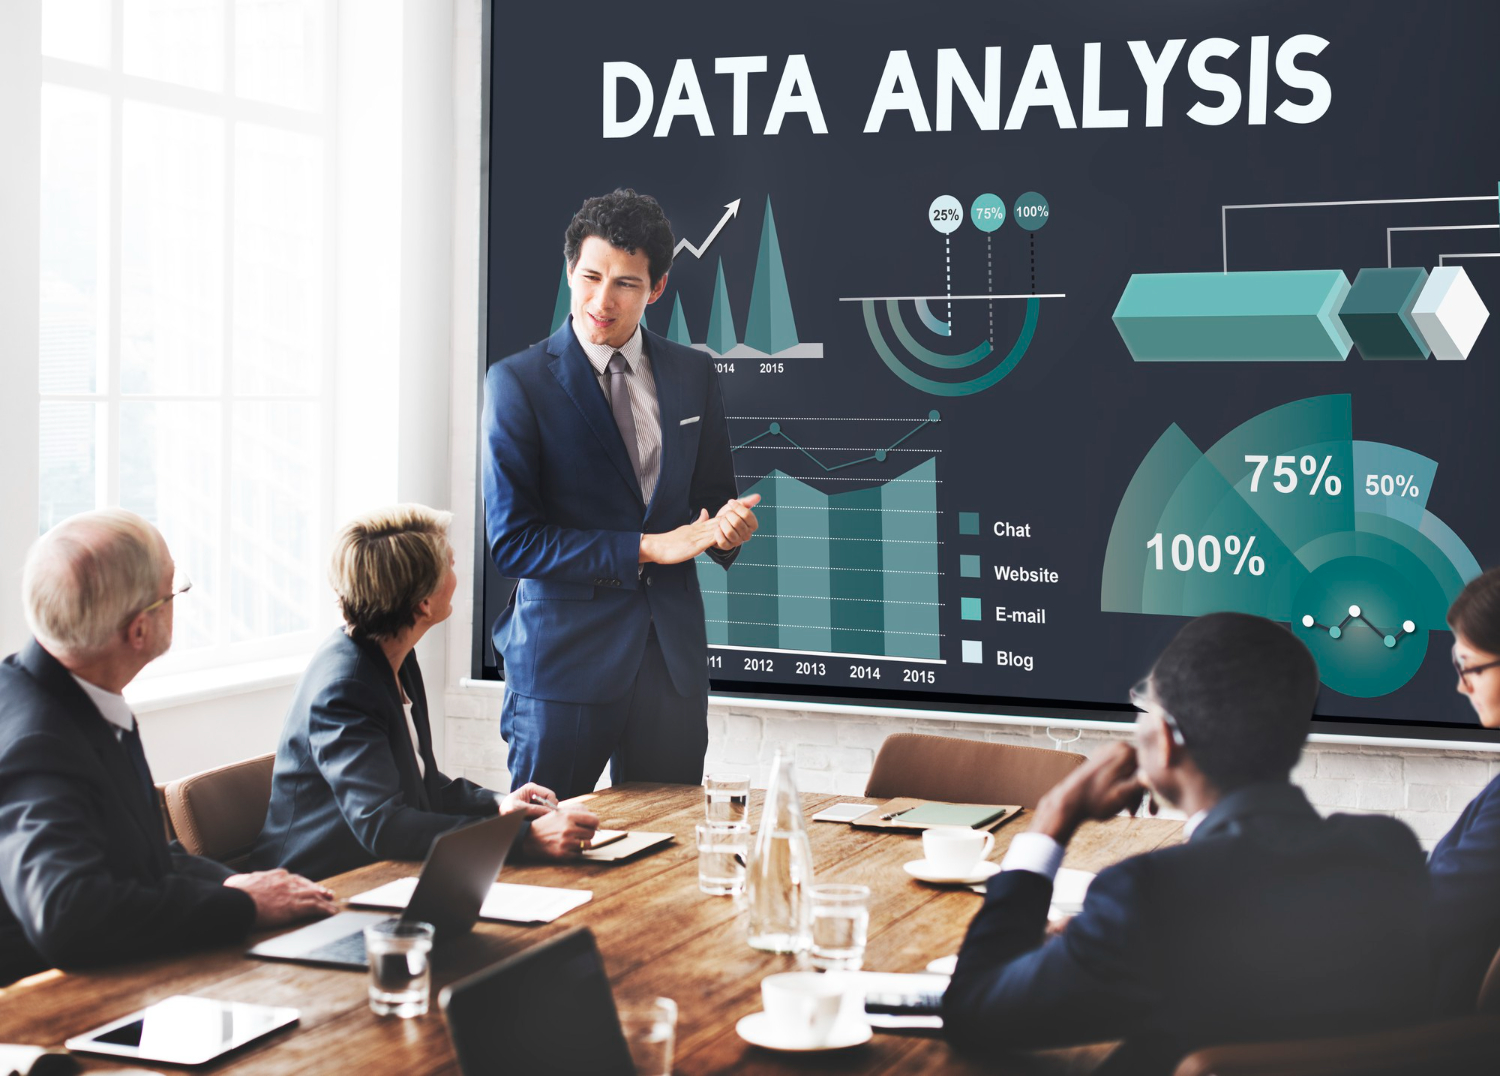 Universal Analytics deliver wealth of valuable historical data